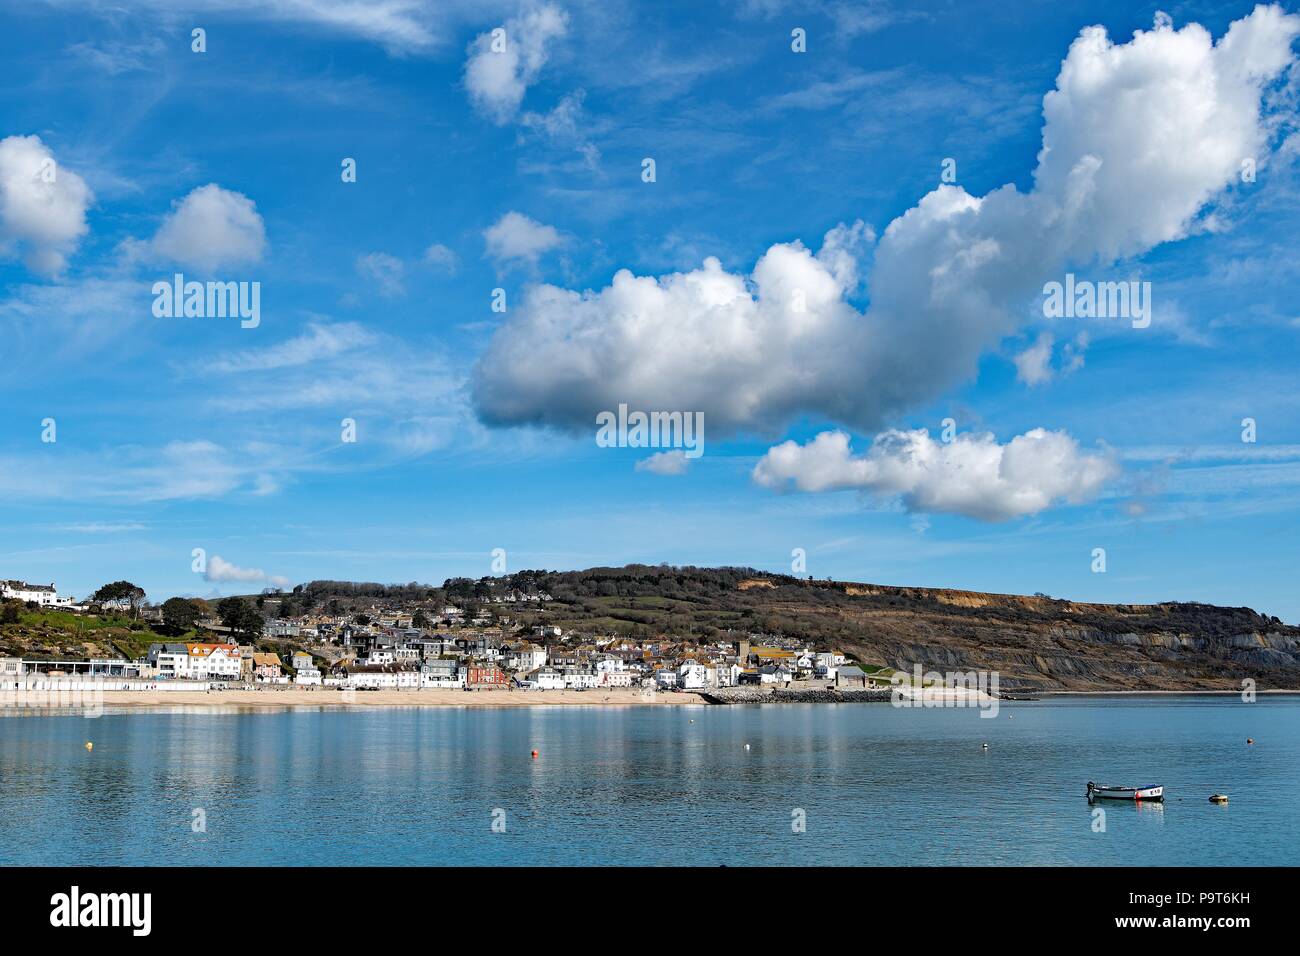 Taken to capture the town of Lyme Regis and an interesting cloud formation. Stock Photo